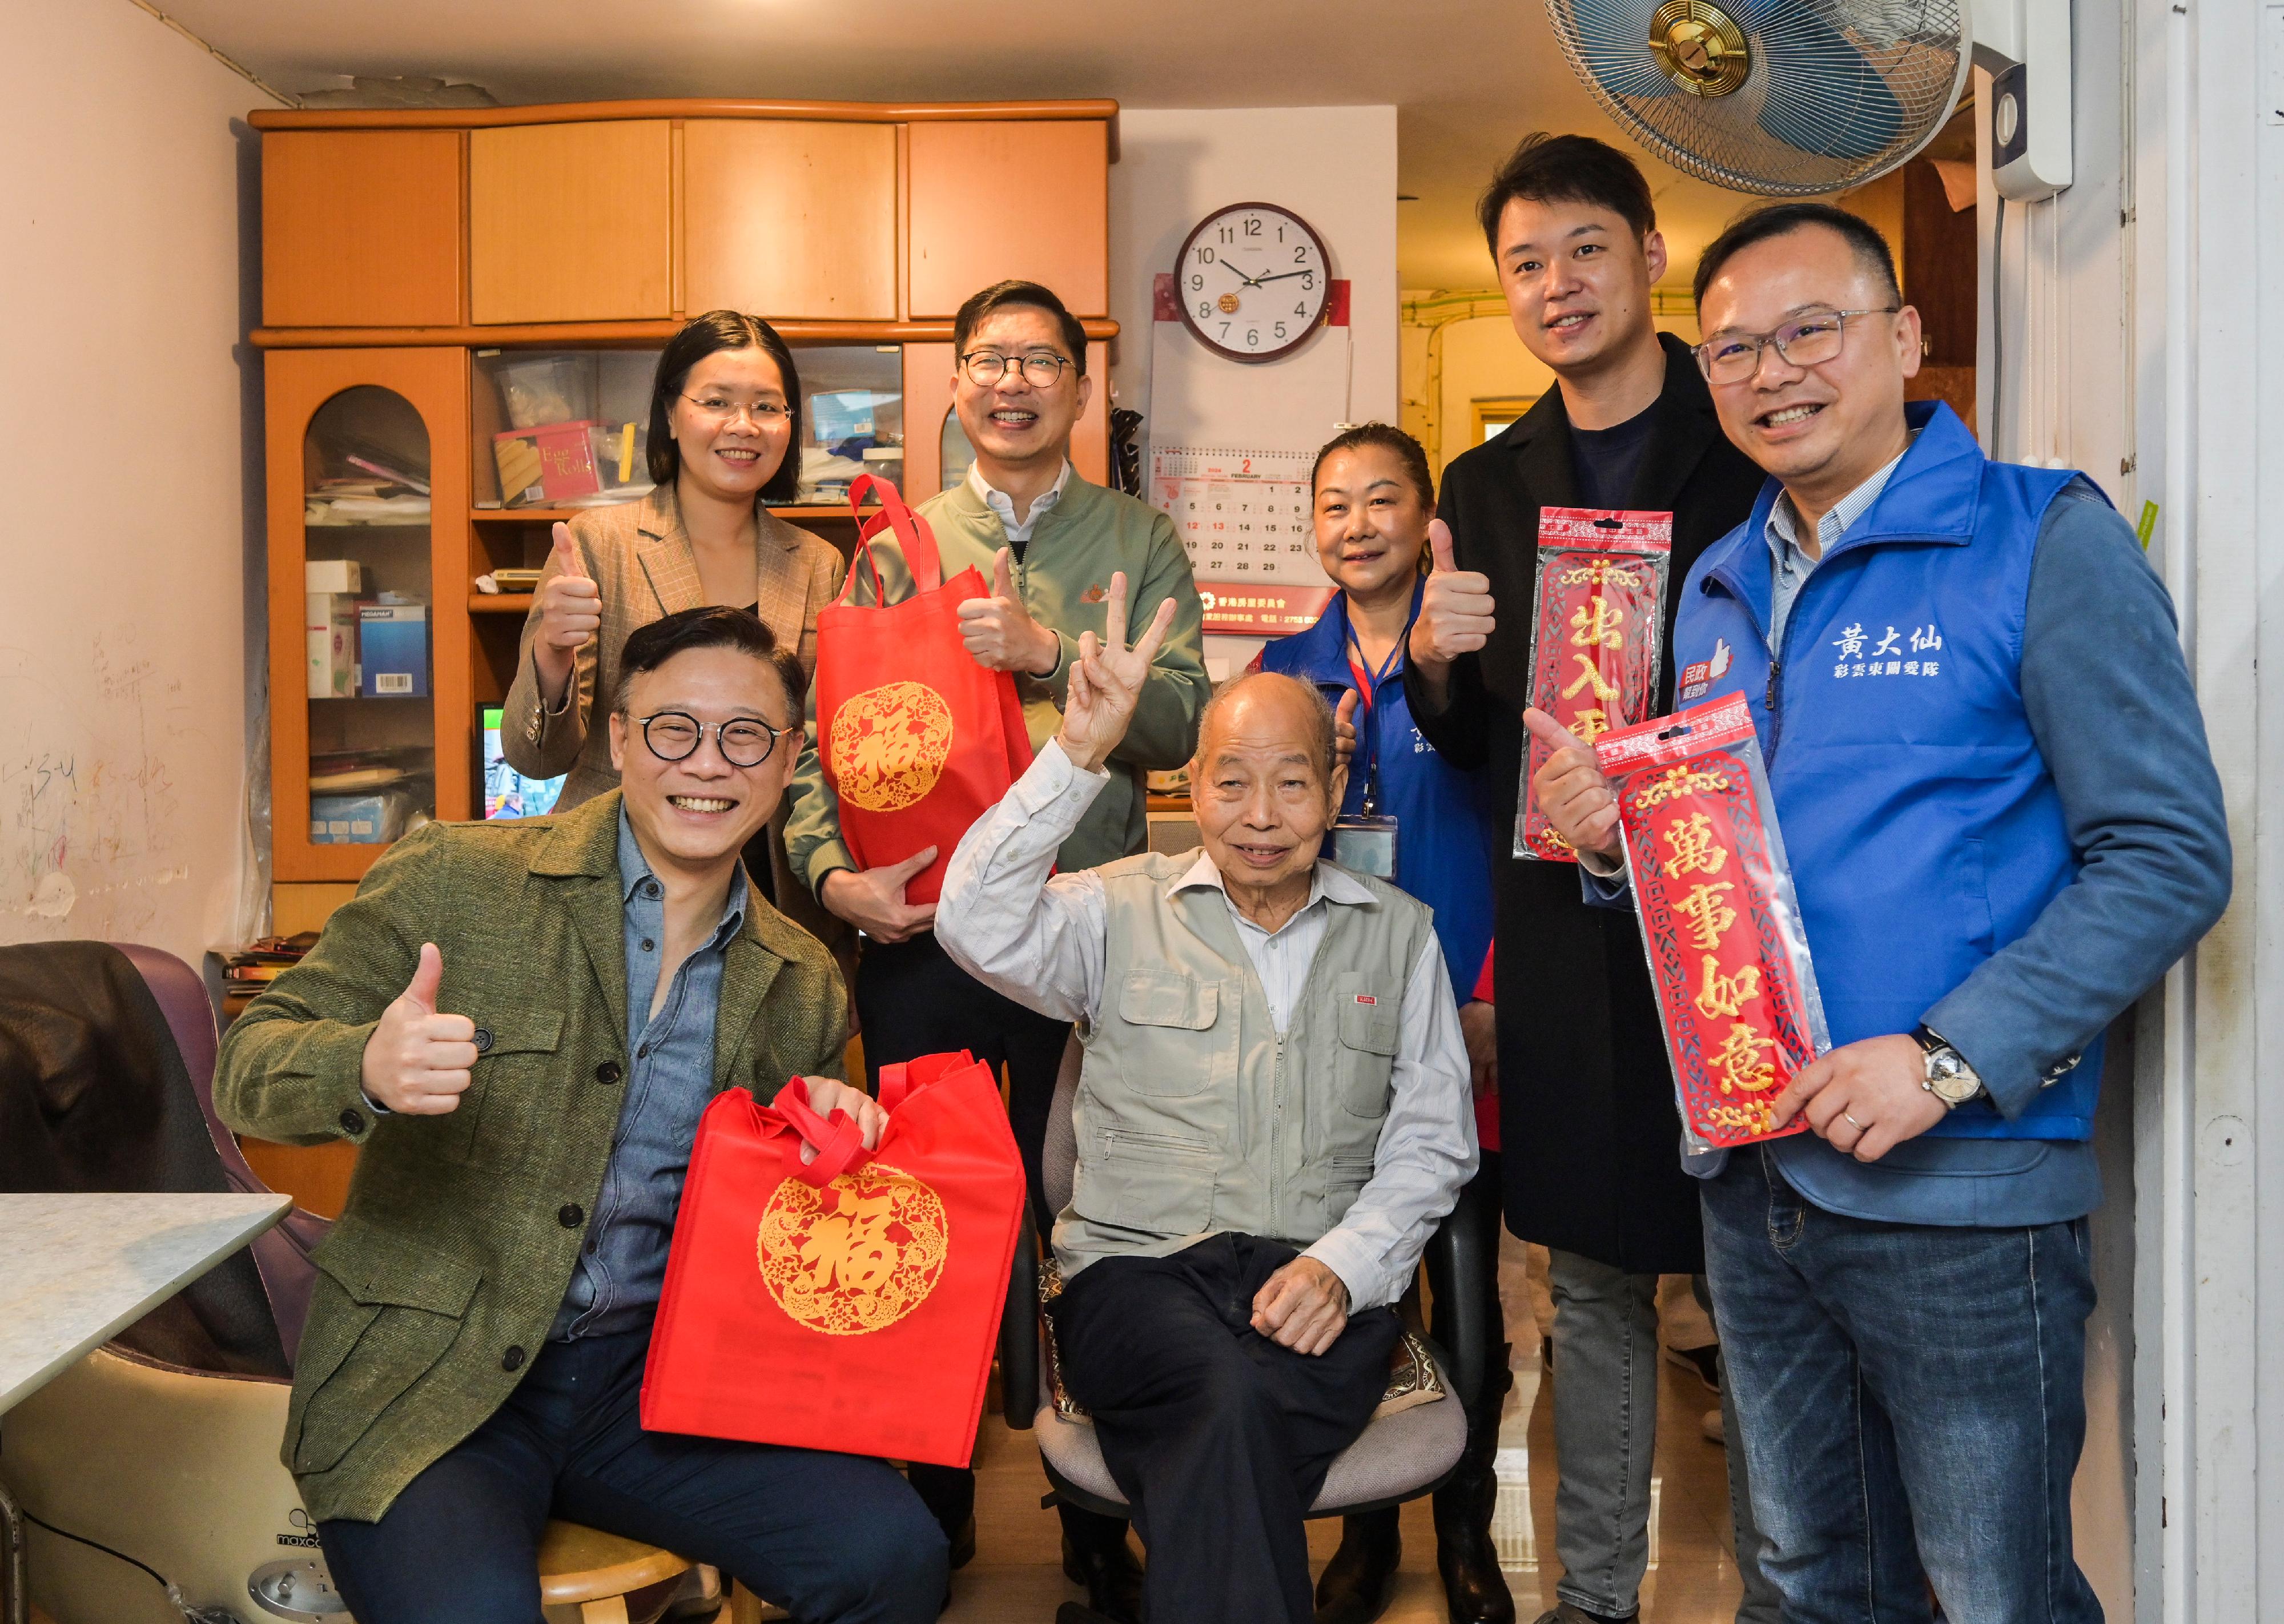 The Deputy Secretary for Justice, Mr Cheung Kwok-kwan, today (February 7) visited grassroots families and elderly people living in Choi Wan Estate, Ngau Chi Wan, to chat with them and distribute blessing bags in celebration of the Chinese New Year. Photo shows Mr Cheung (front row, first left), together with the District Officer (Wong Tai Sin), Mr Thomas Wu (back row, second left), Wong Tai Sin District Council members and representatives from the Care Team (Wong Tai Sin), visiting an elderly person living alone in Choi Wan Estate.